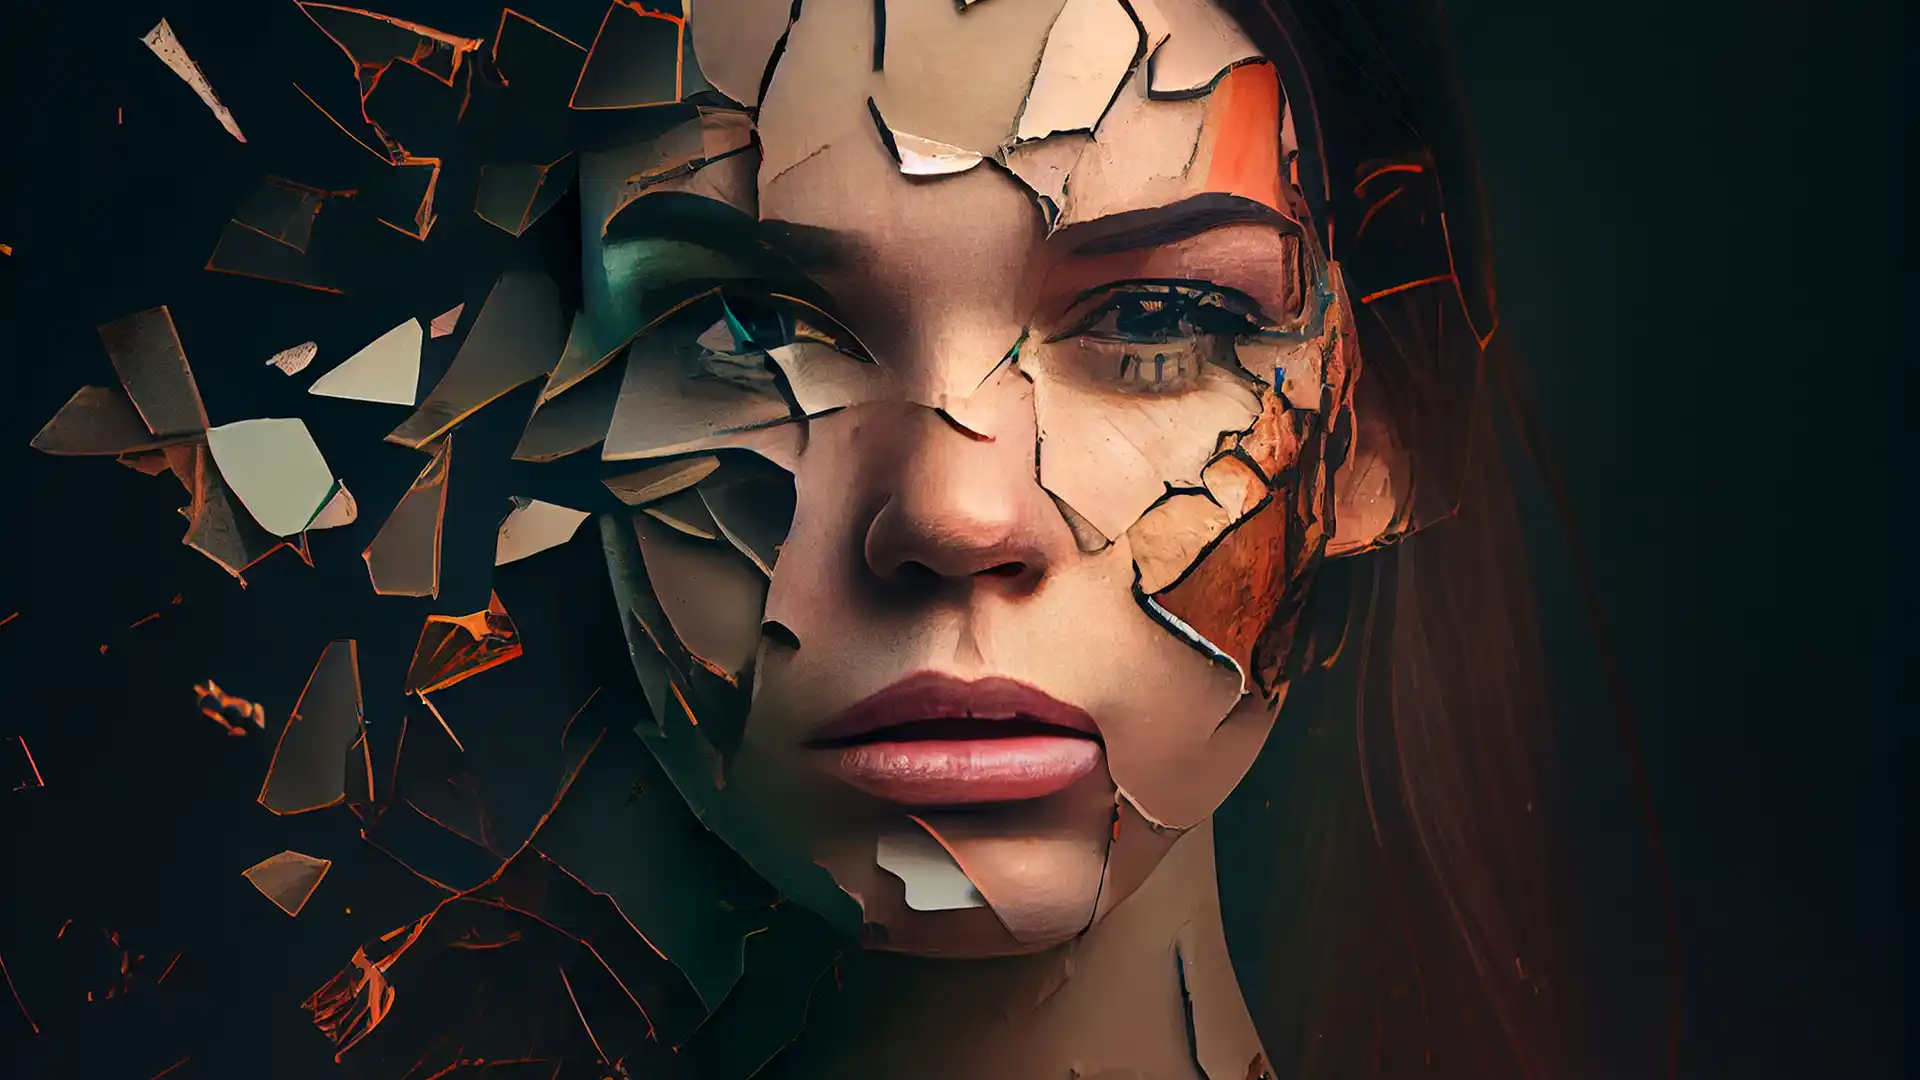 Explosive beauty - Cover art for 'Pieces' by Alexey Sobolev featuring a fragmented female face